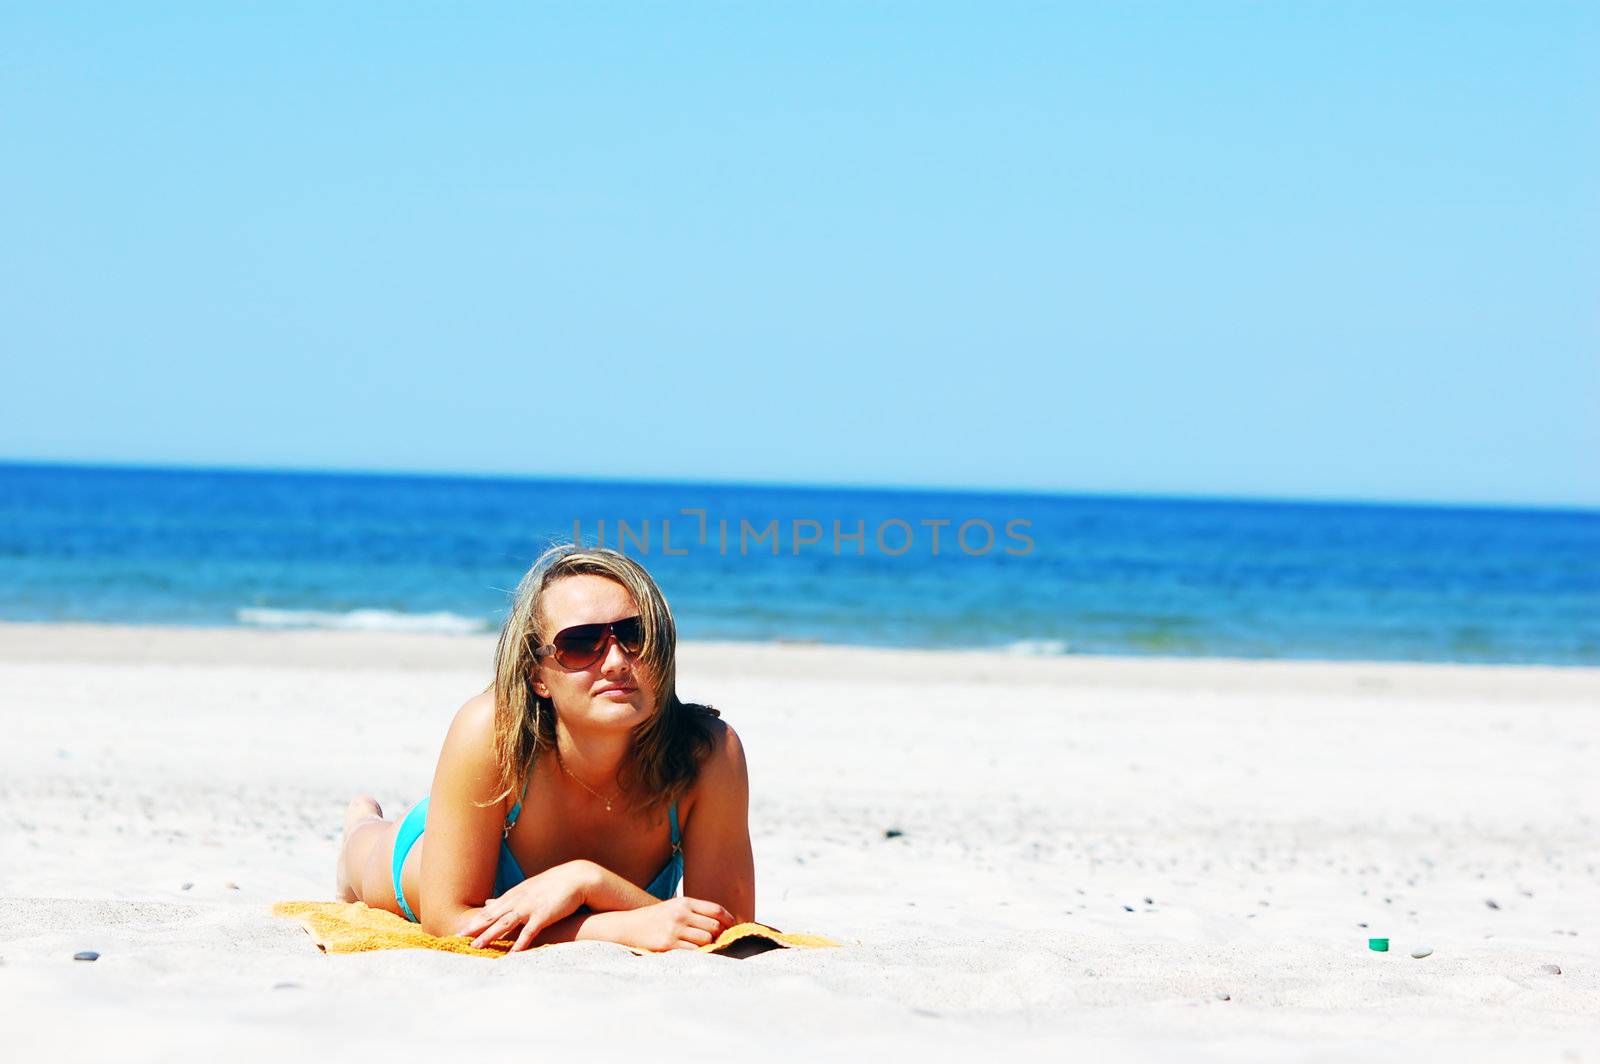 Beautiful woman relaxing on the beach. Lots of useful copyspace